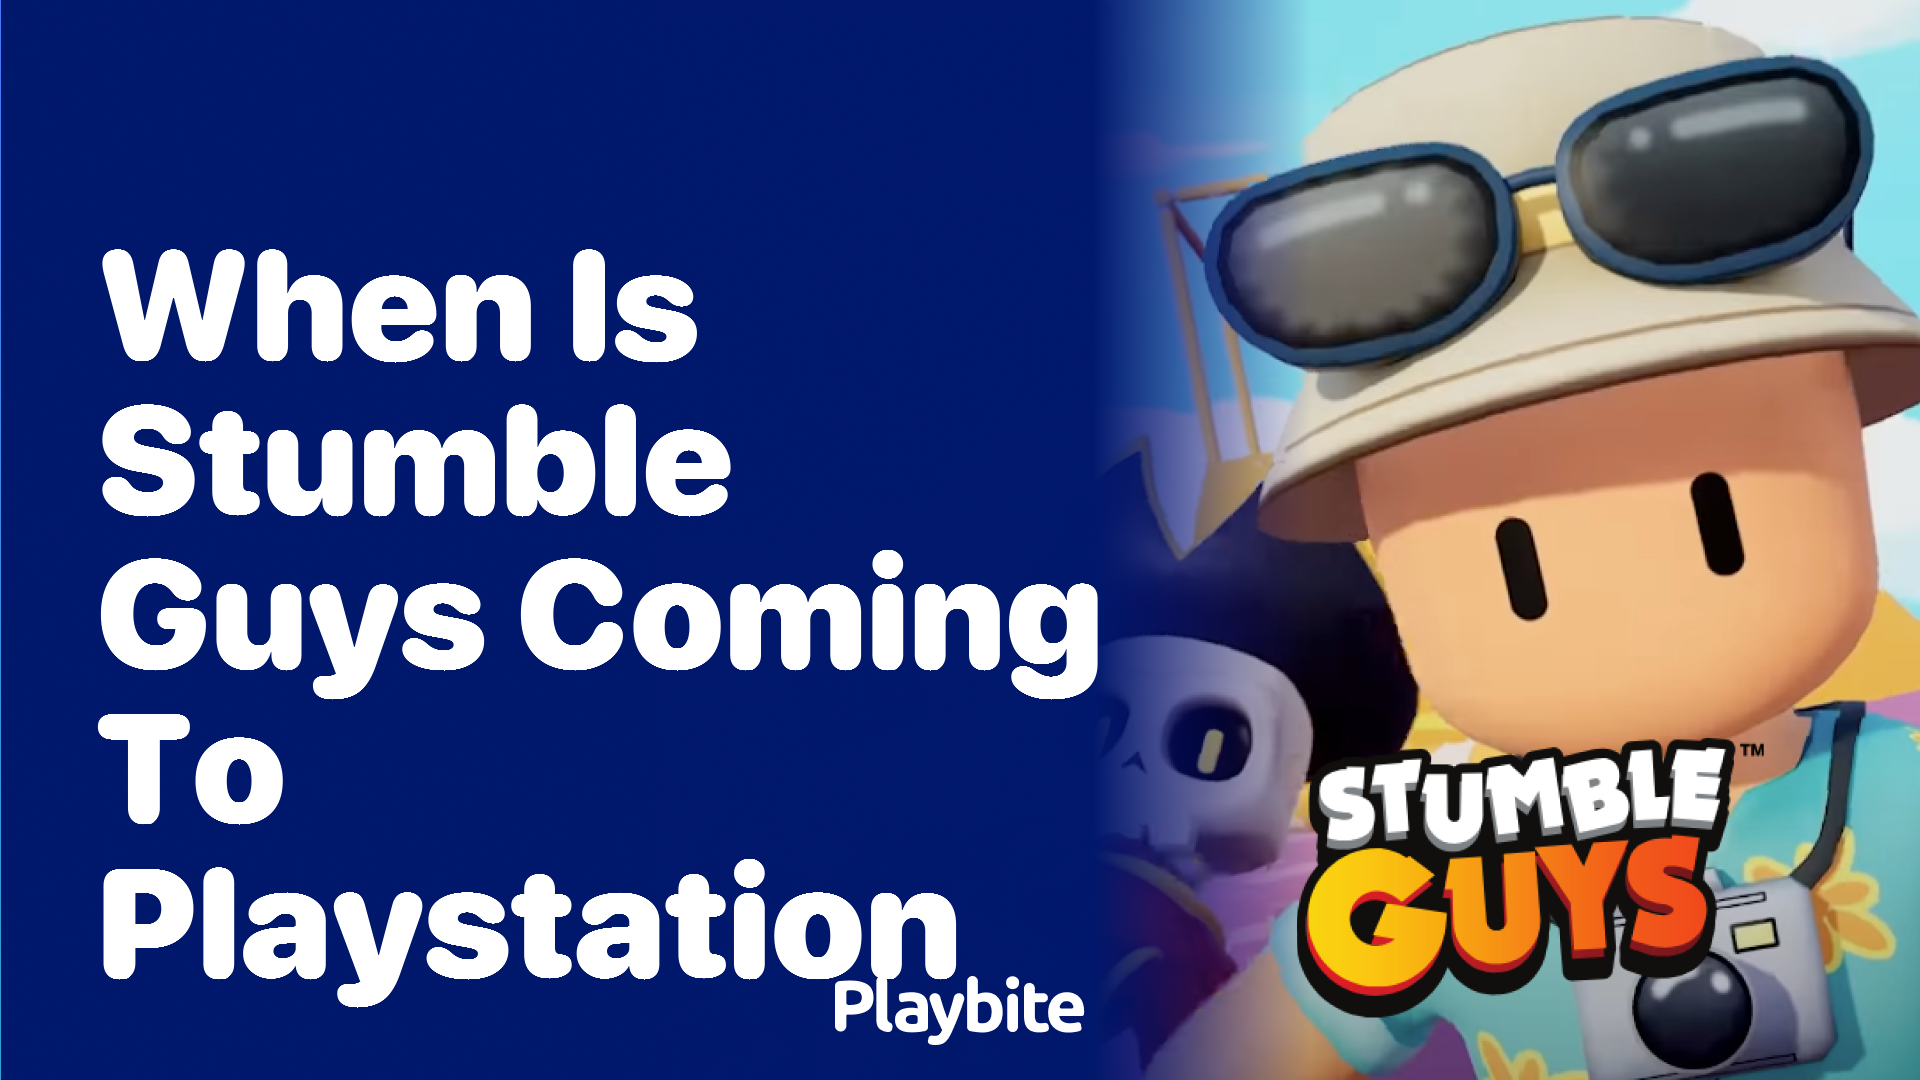 When Is Stumble Guys Coming to PlayStation?